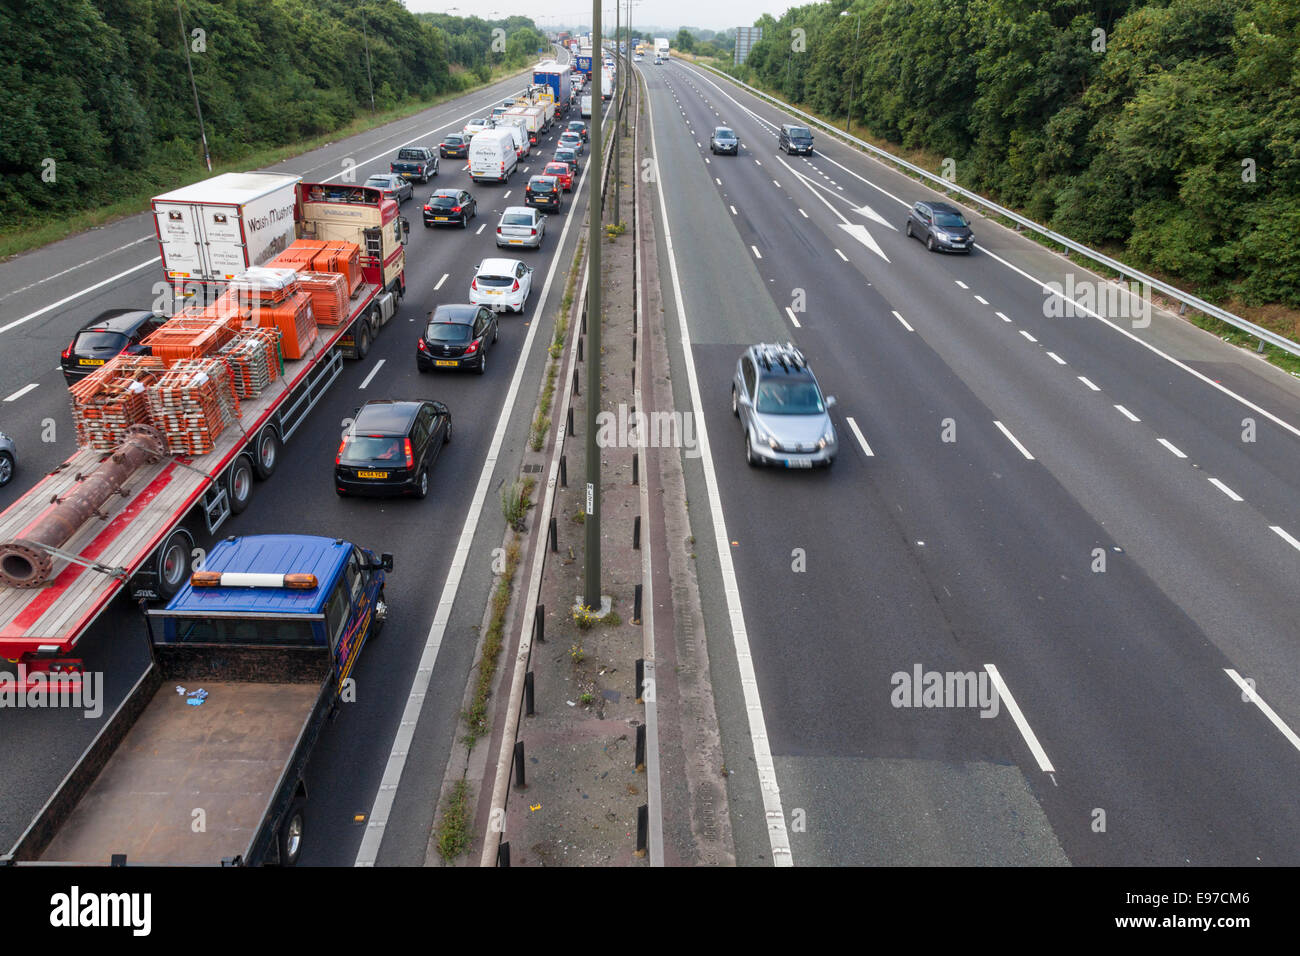 Traffic jam. Queue with vehicles at a standstill on the southbound M1 motorway carriageway with clear northbound lanes. Nottinghamshire, England, UK Stock Photo